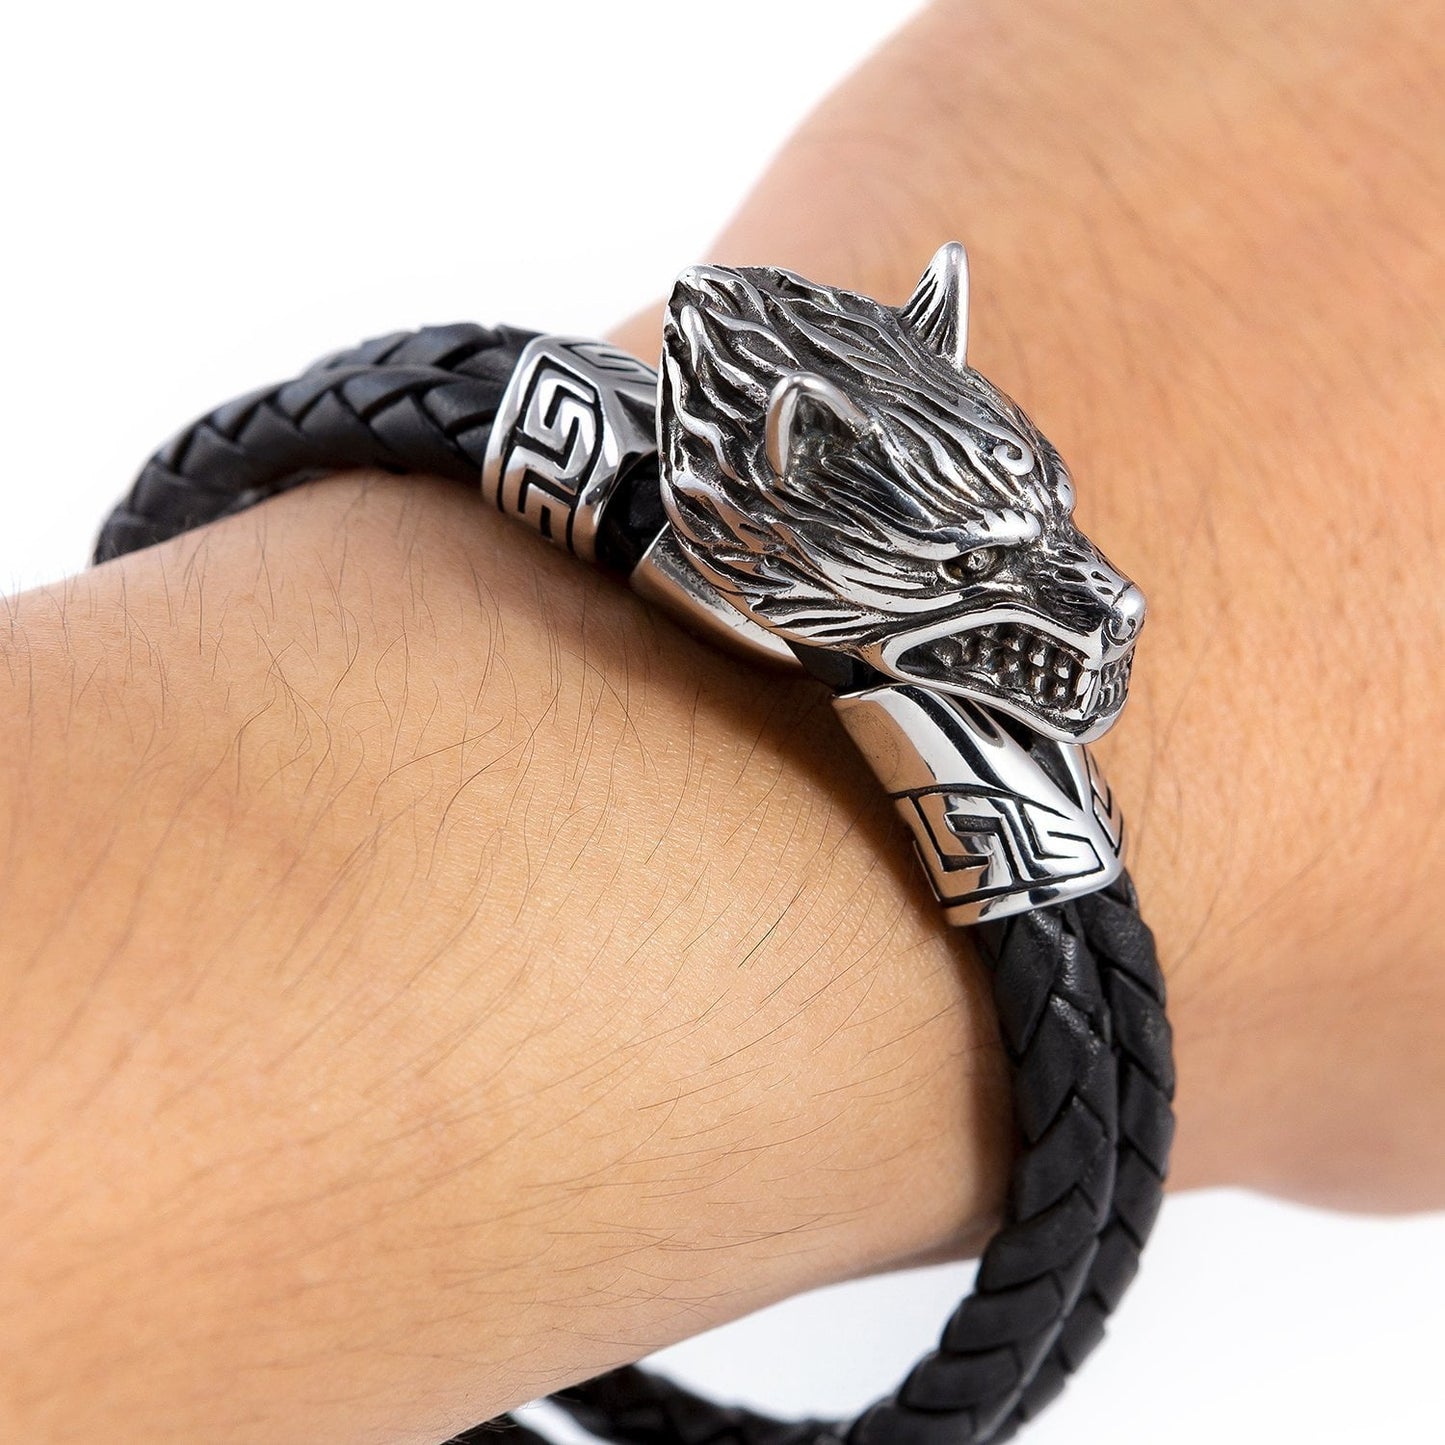 Stainless Steel Viking Wolf Head with Braided Leather Bracelet - SilverMania925